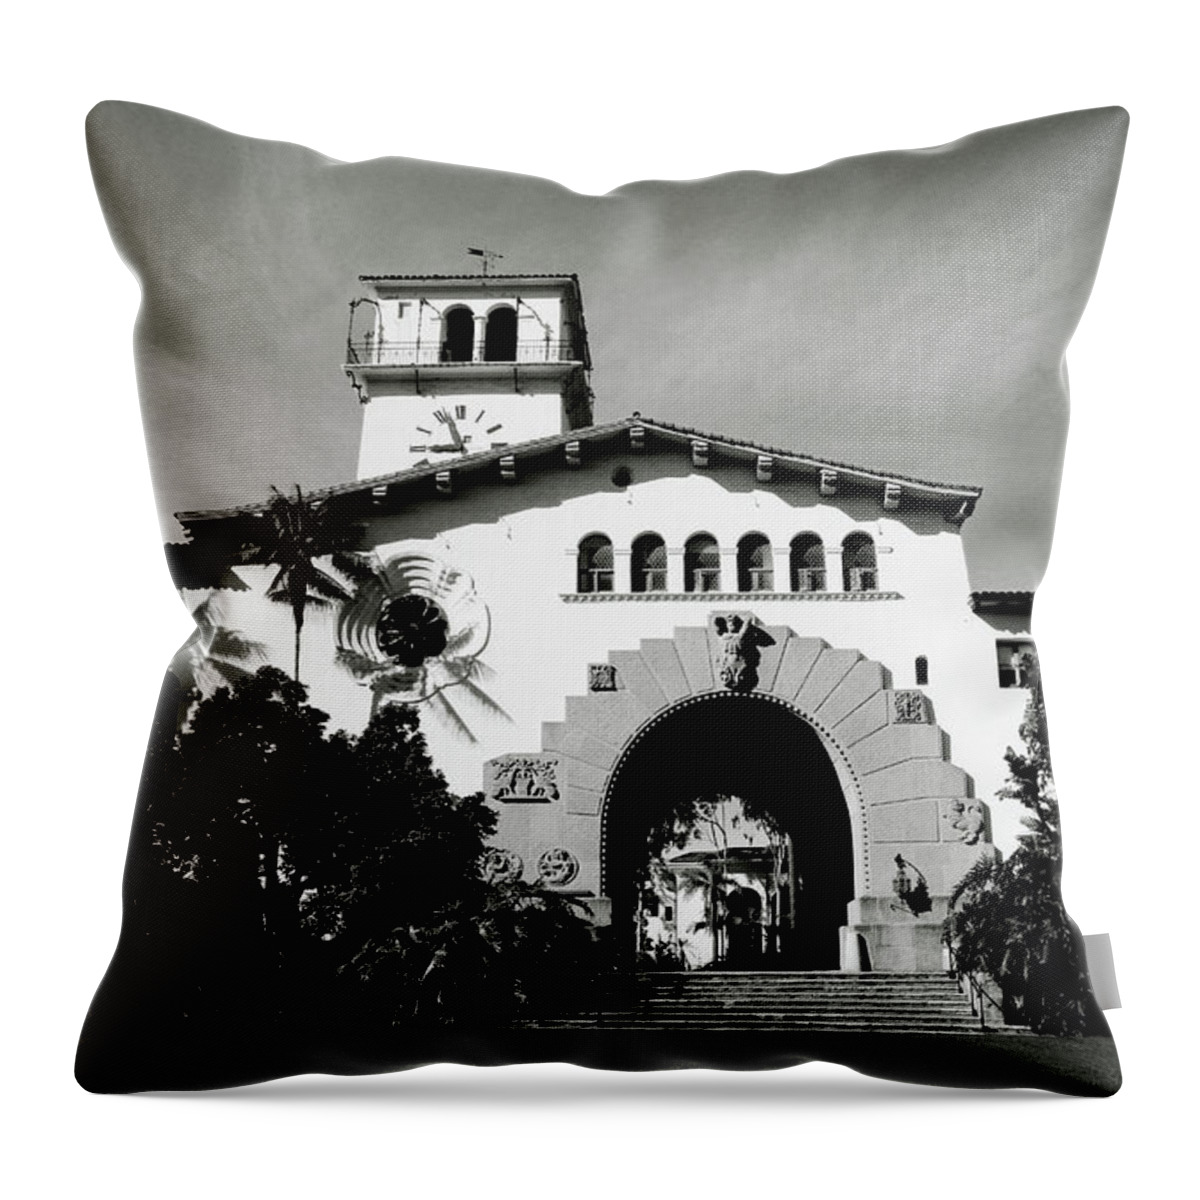 Santa Barbara Throw Pillow featuring the mixed media Santa Barbara Courthouse Black And White-by Linda Woods by Linda Woods